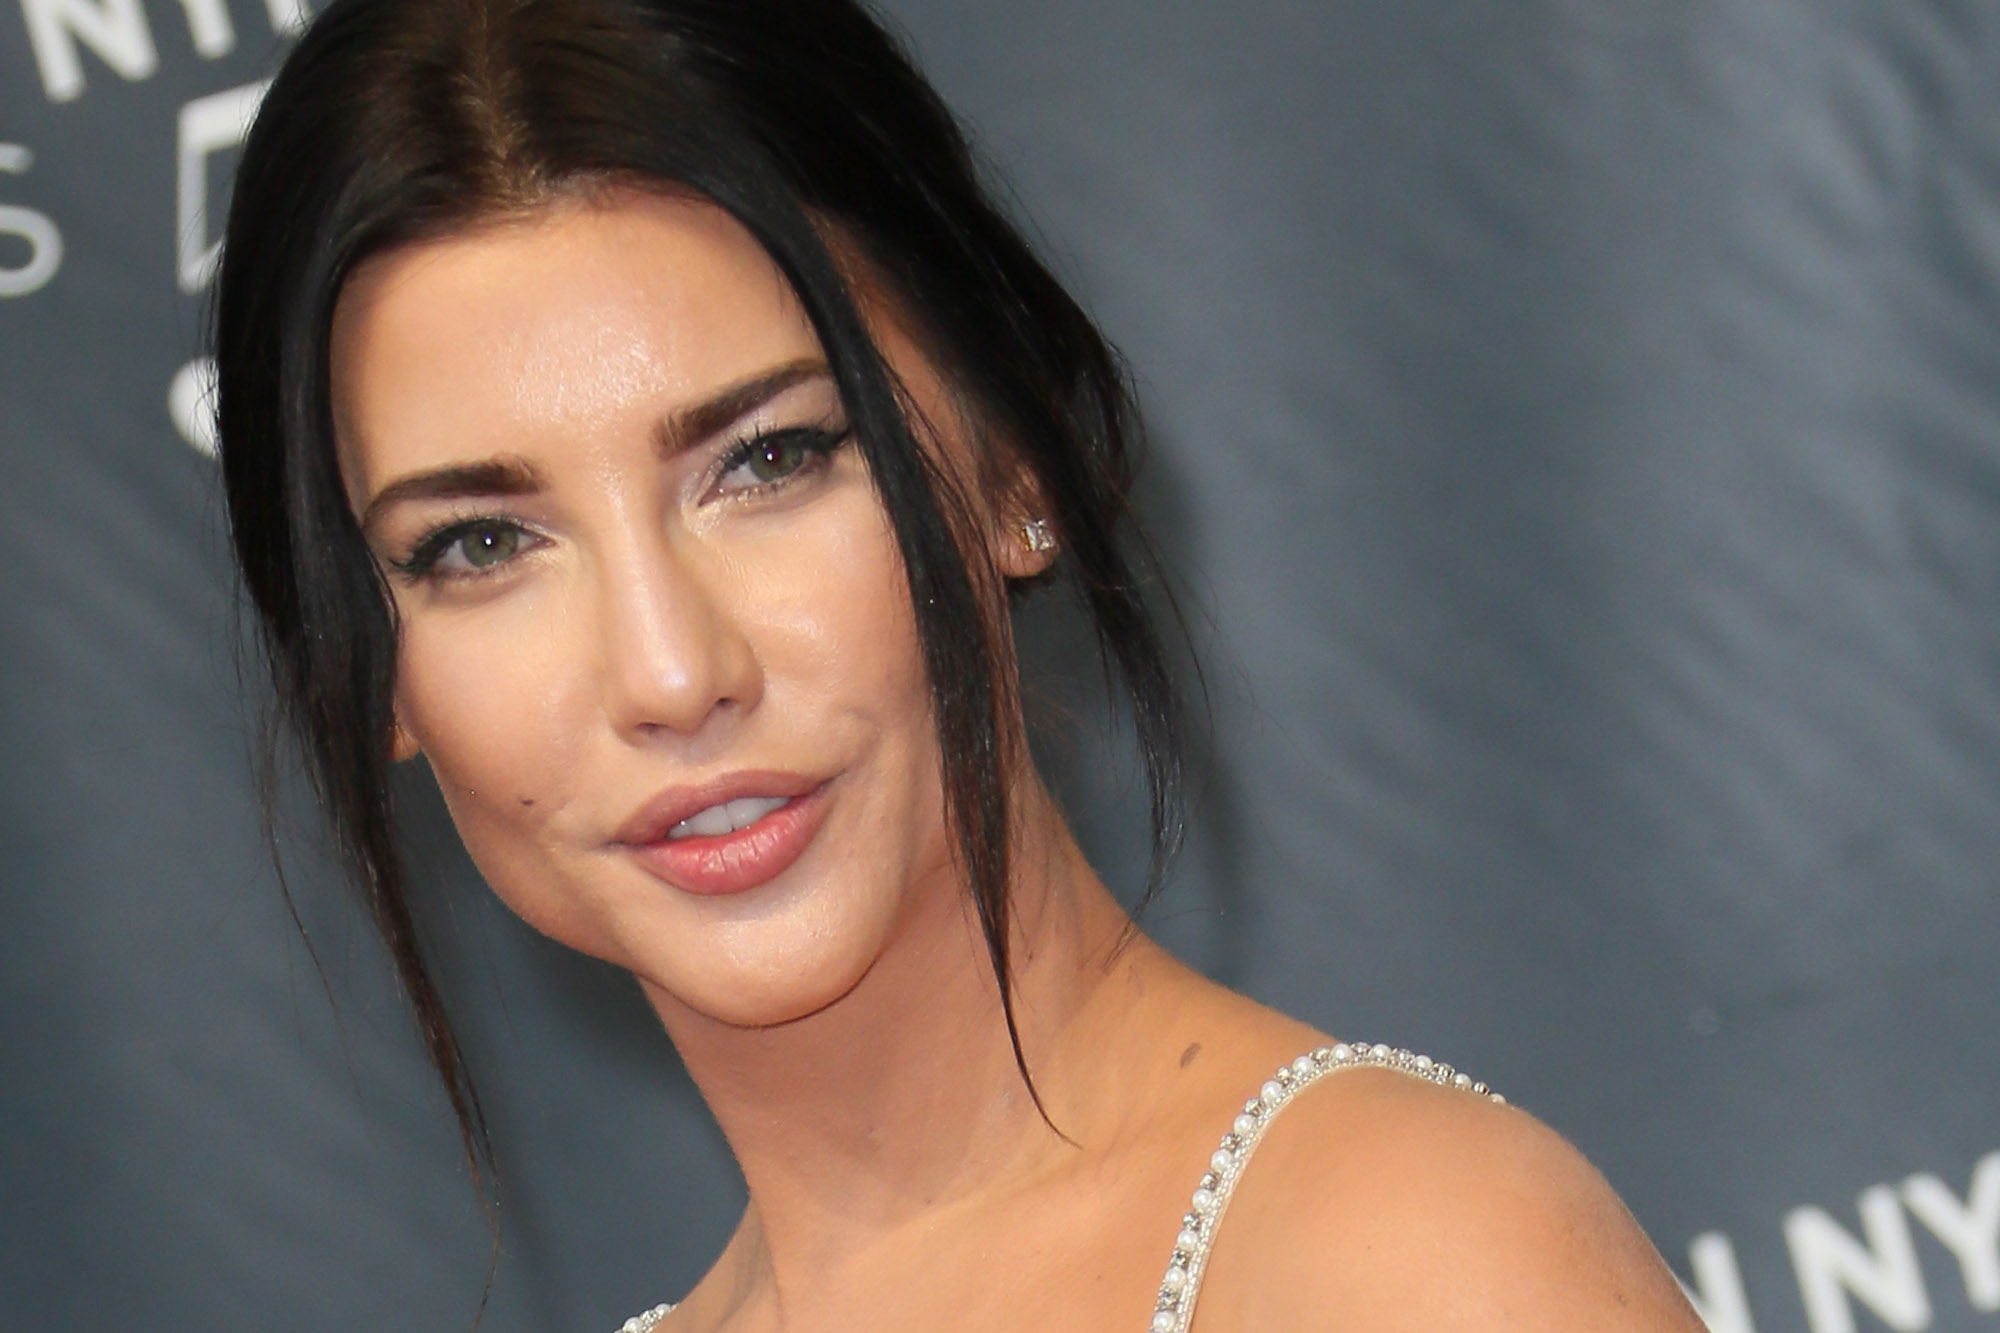 Jacqueline MacInnes Wood smiling in front of a gray background